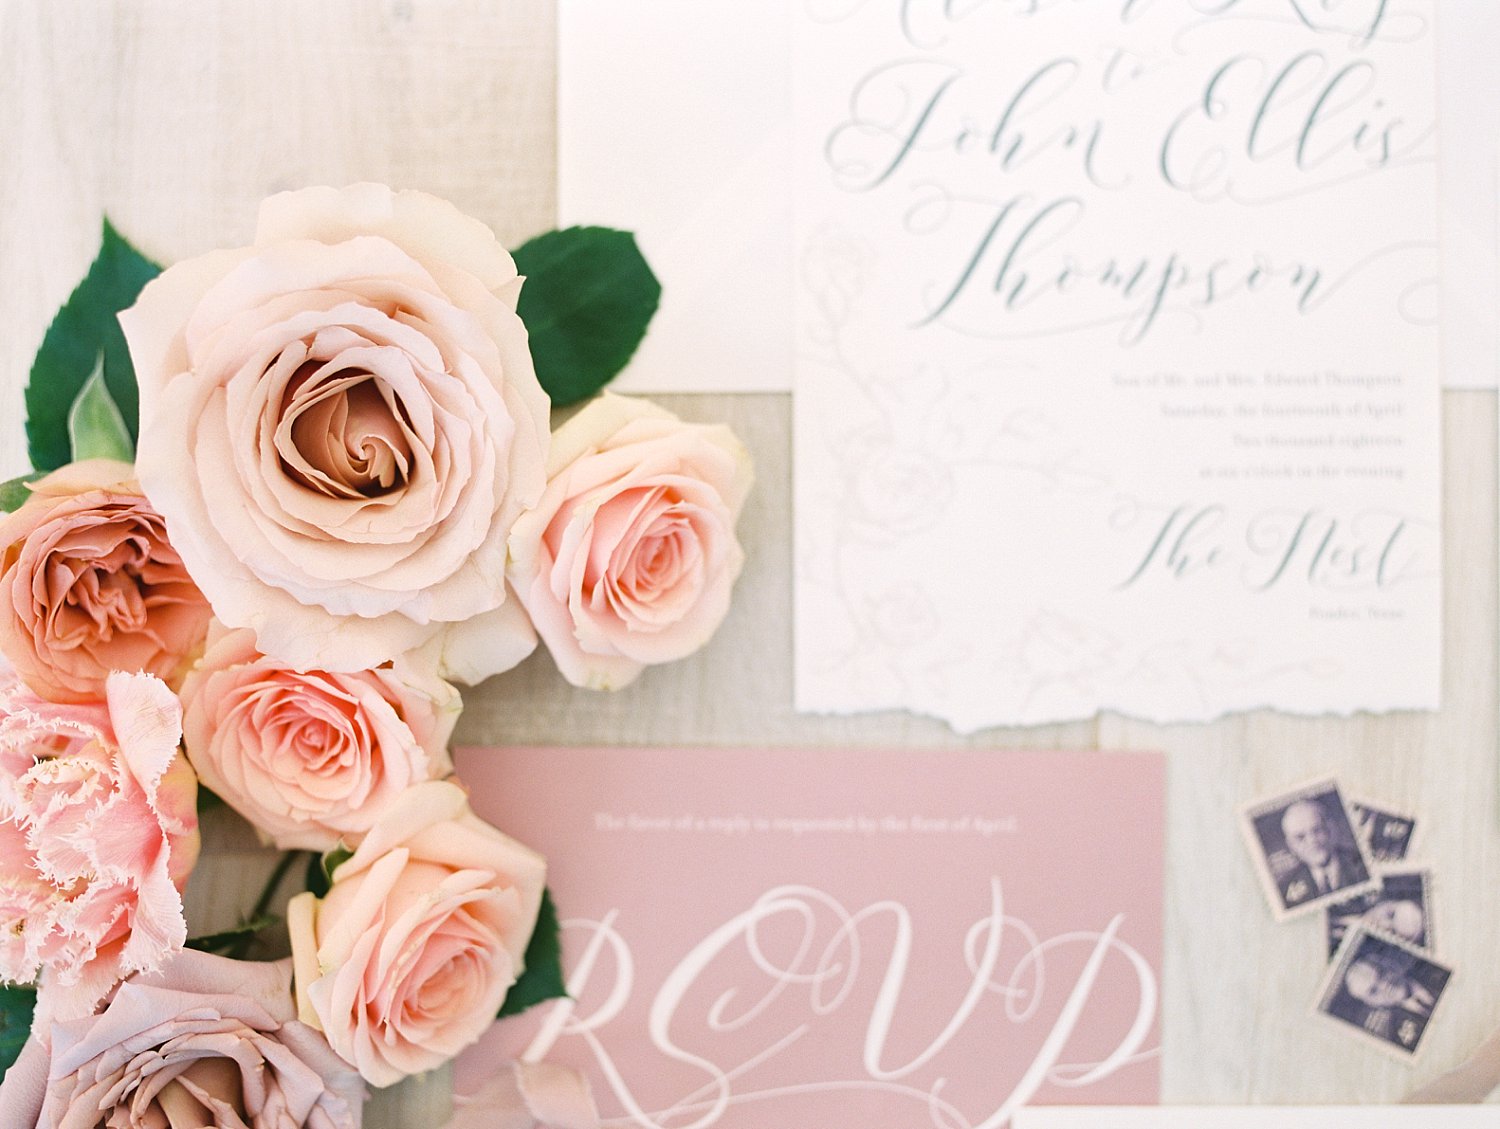 Pink and white wedding invitations